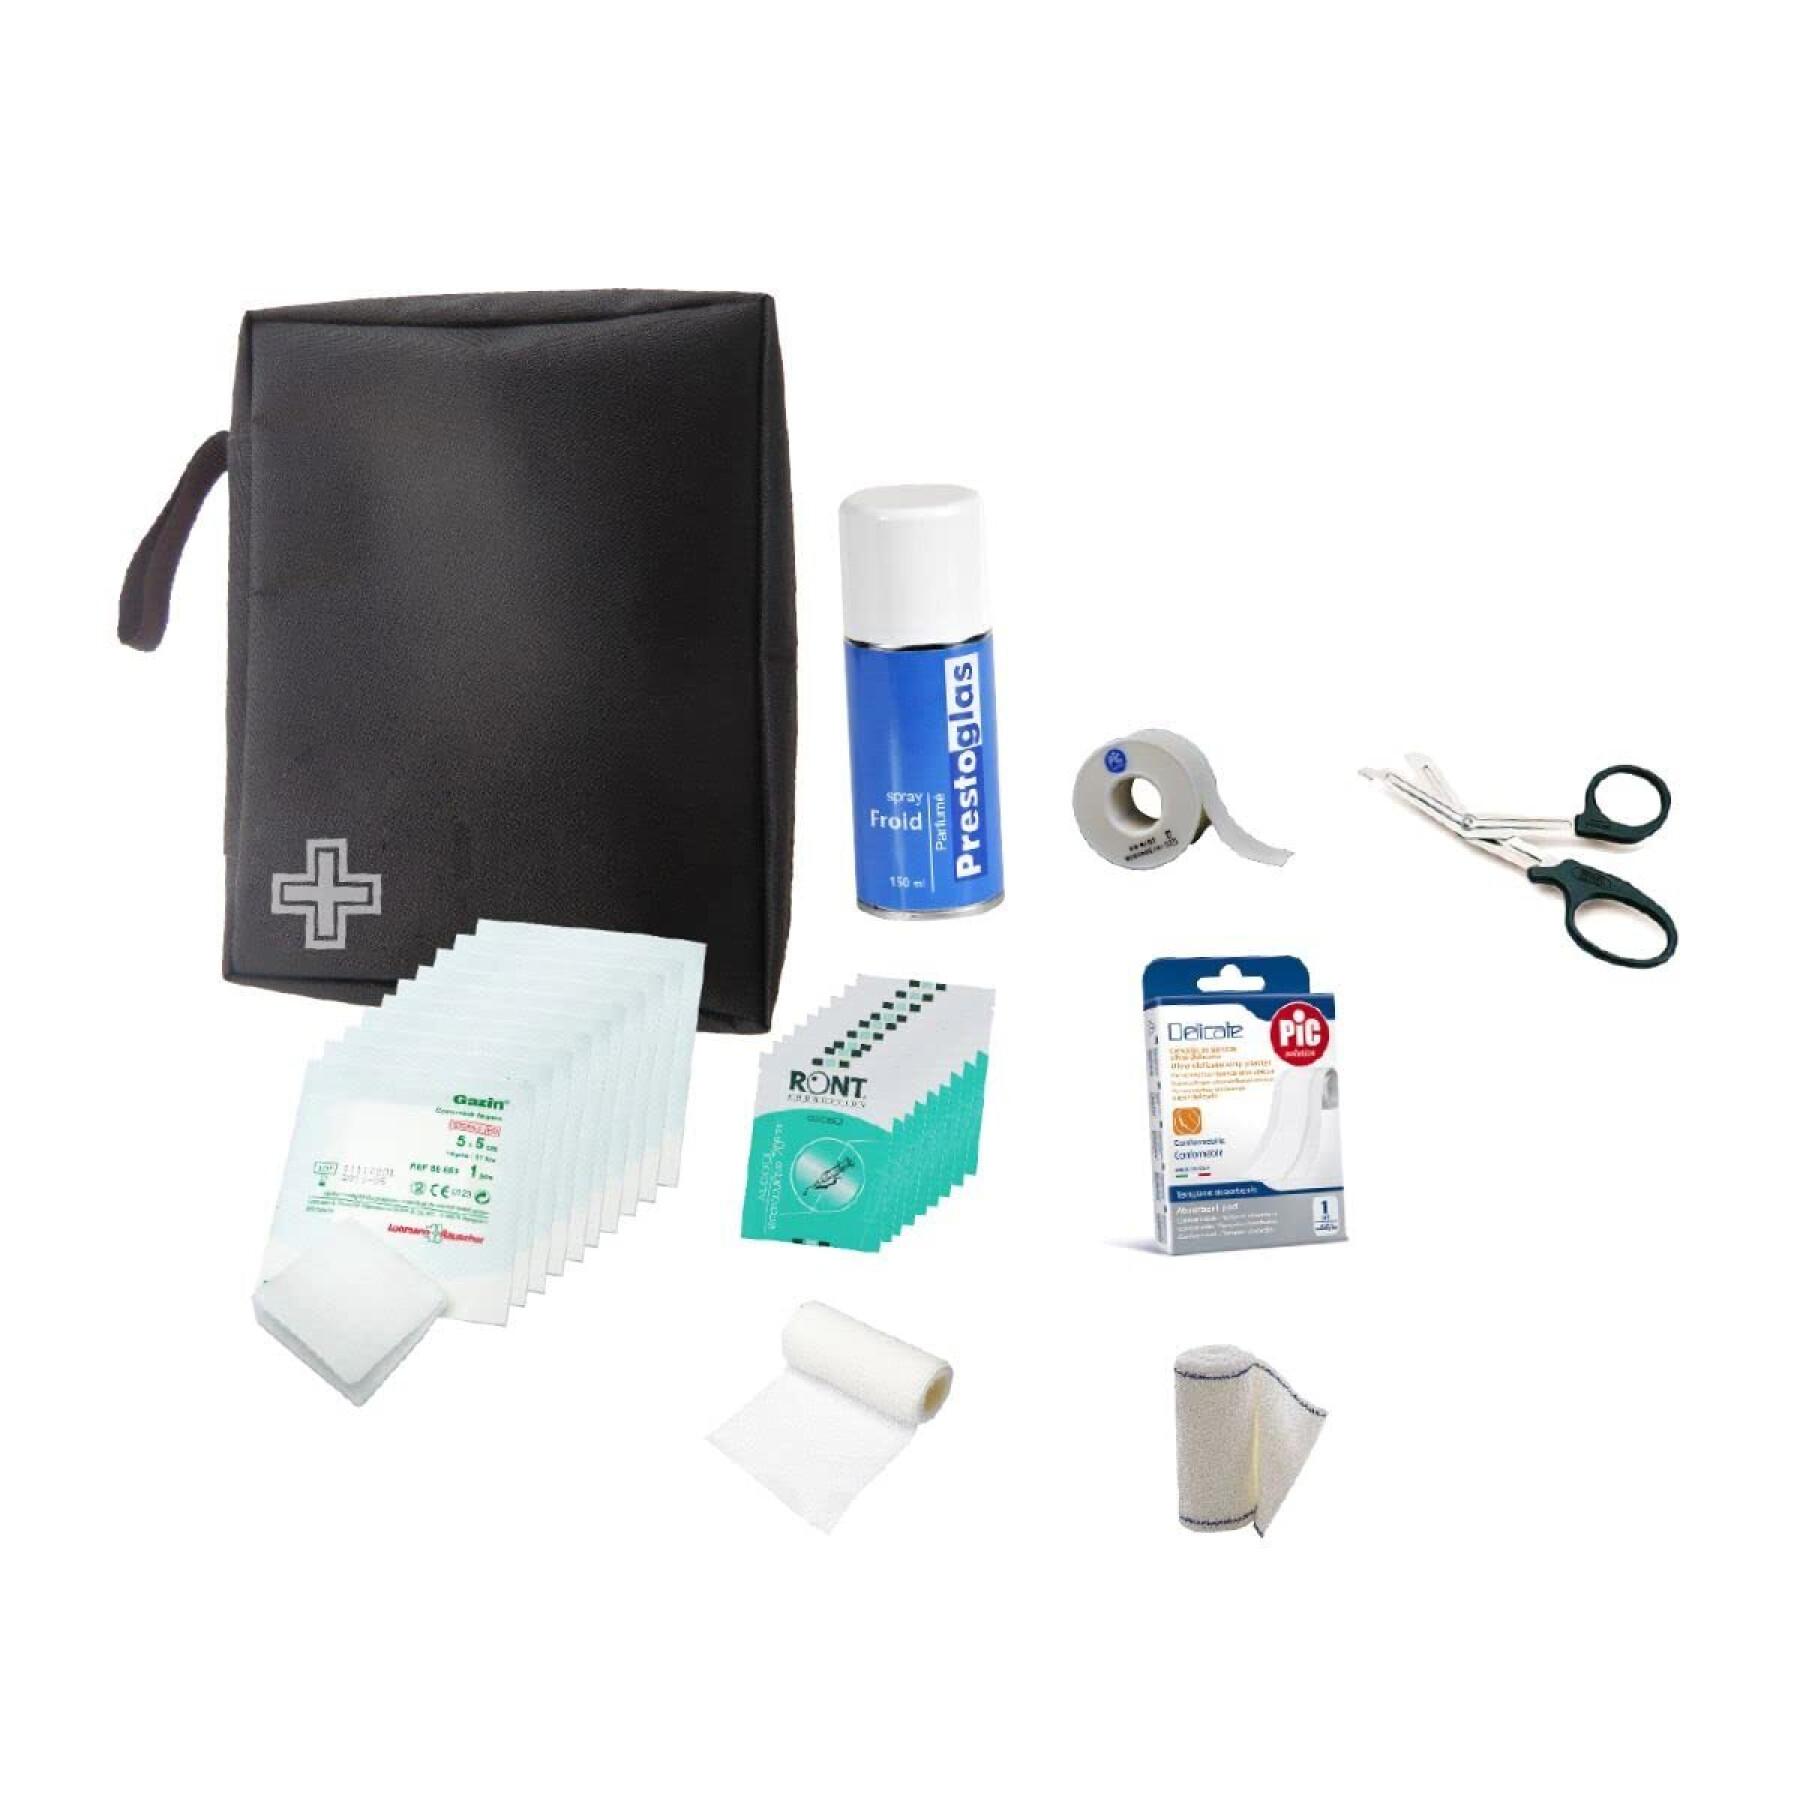 Care kit filled with 1st aid club